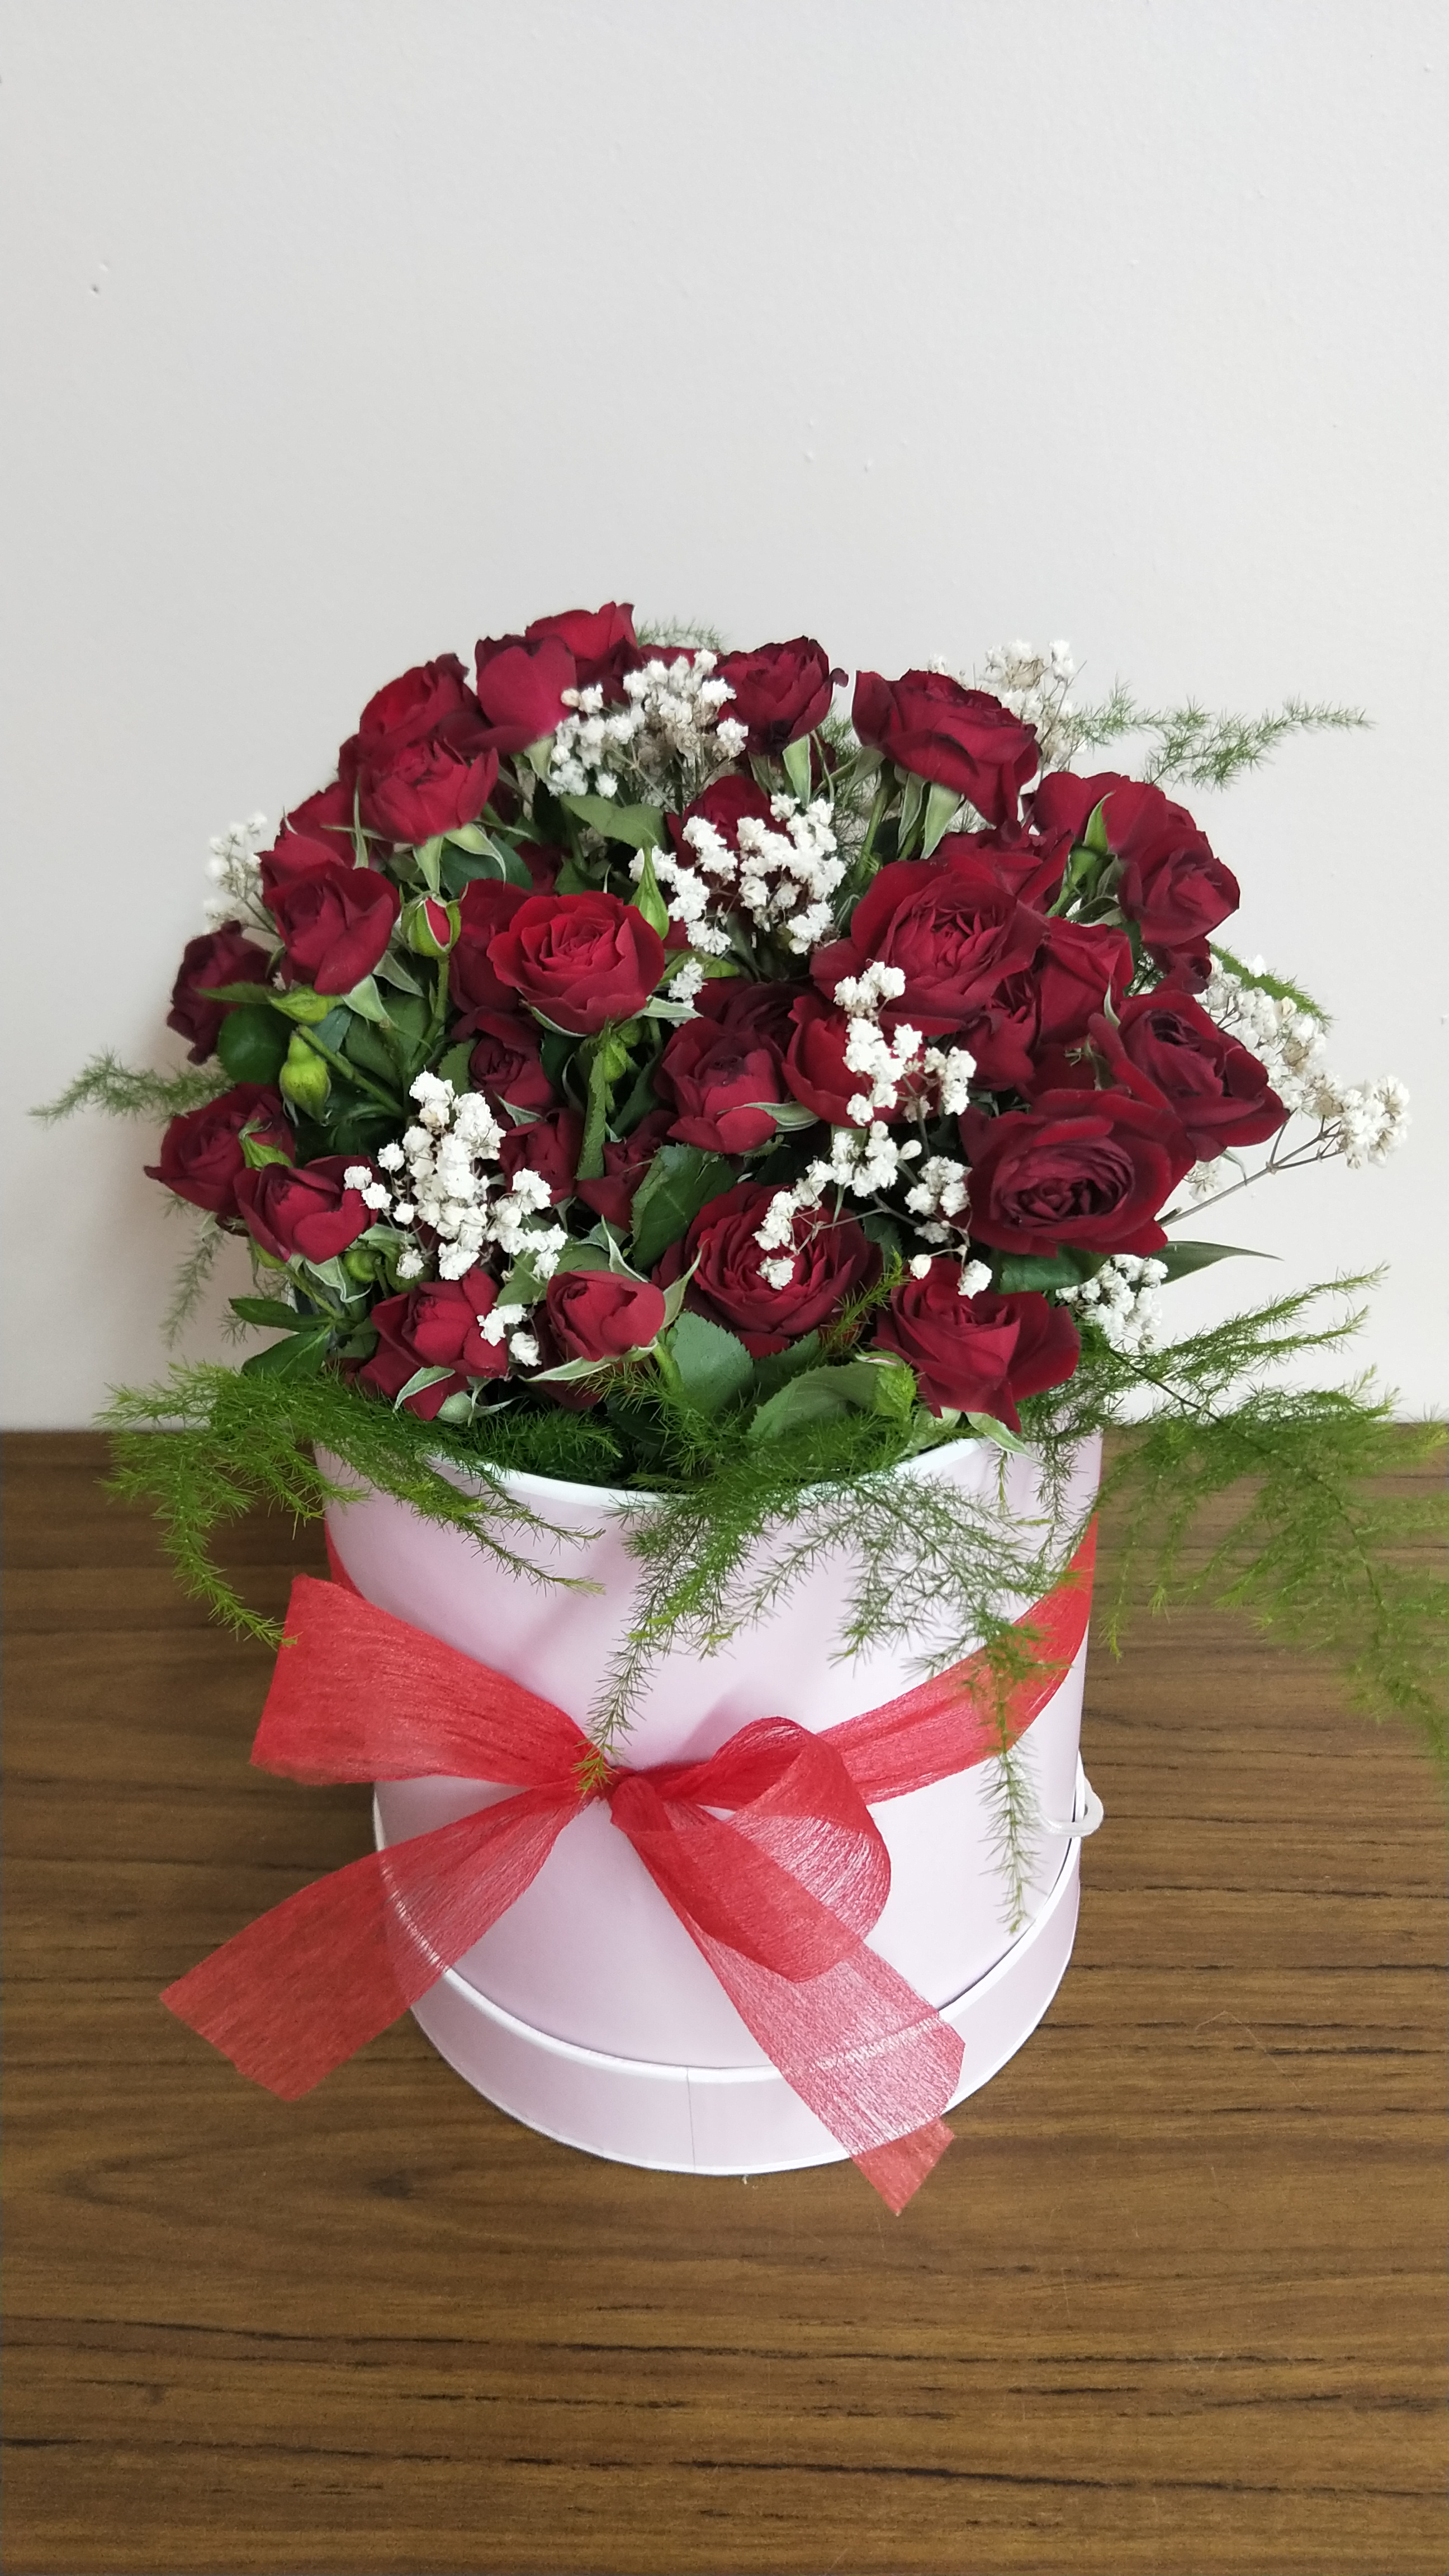 The Rose Box arrangement makes an excellent for any occasion.